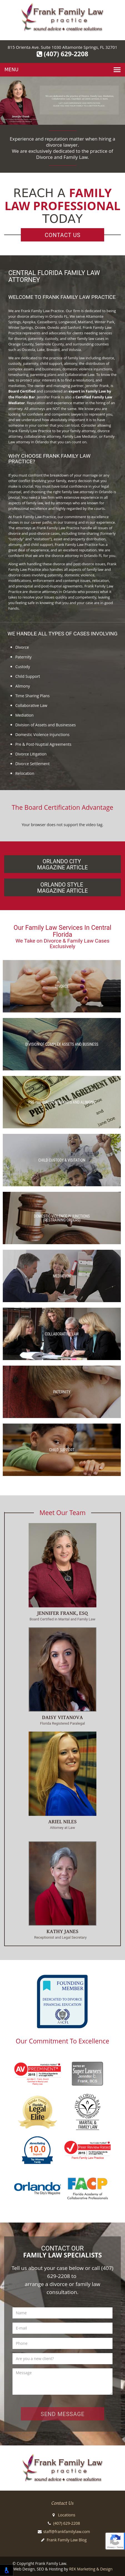 Frank Family Law Practice - Altamonte Springs FL Lawyers